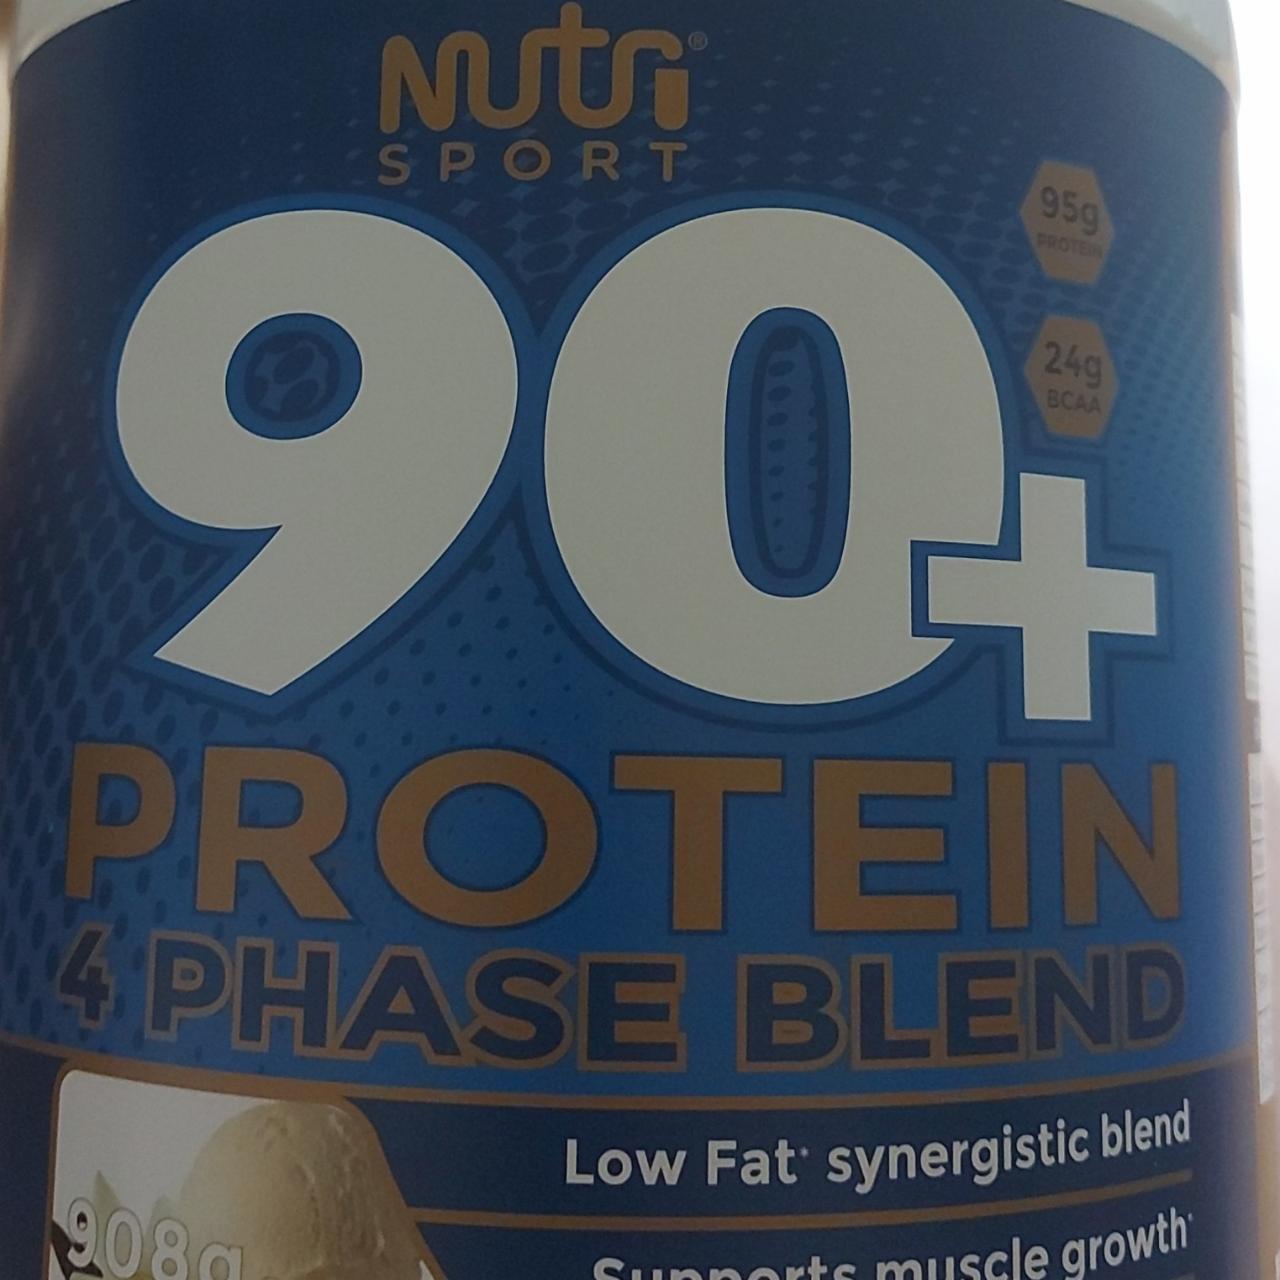 Фото - 90+ Protein 4 phase blend Nutrisport